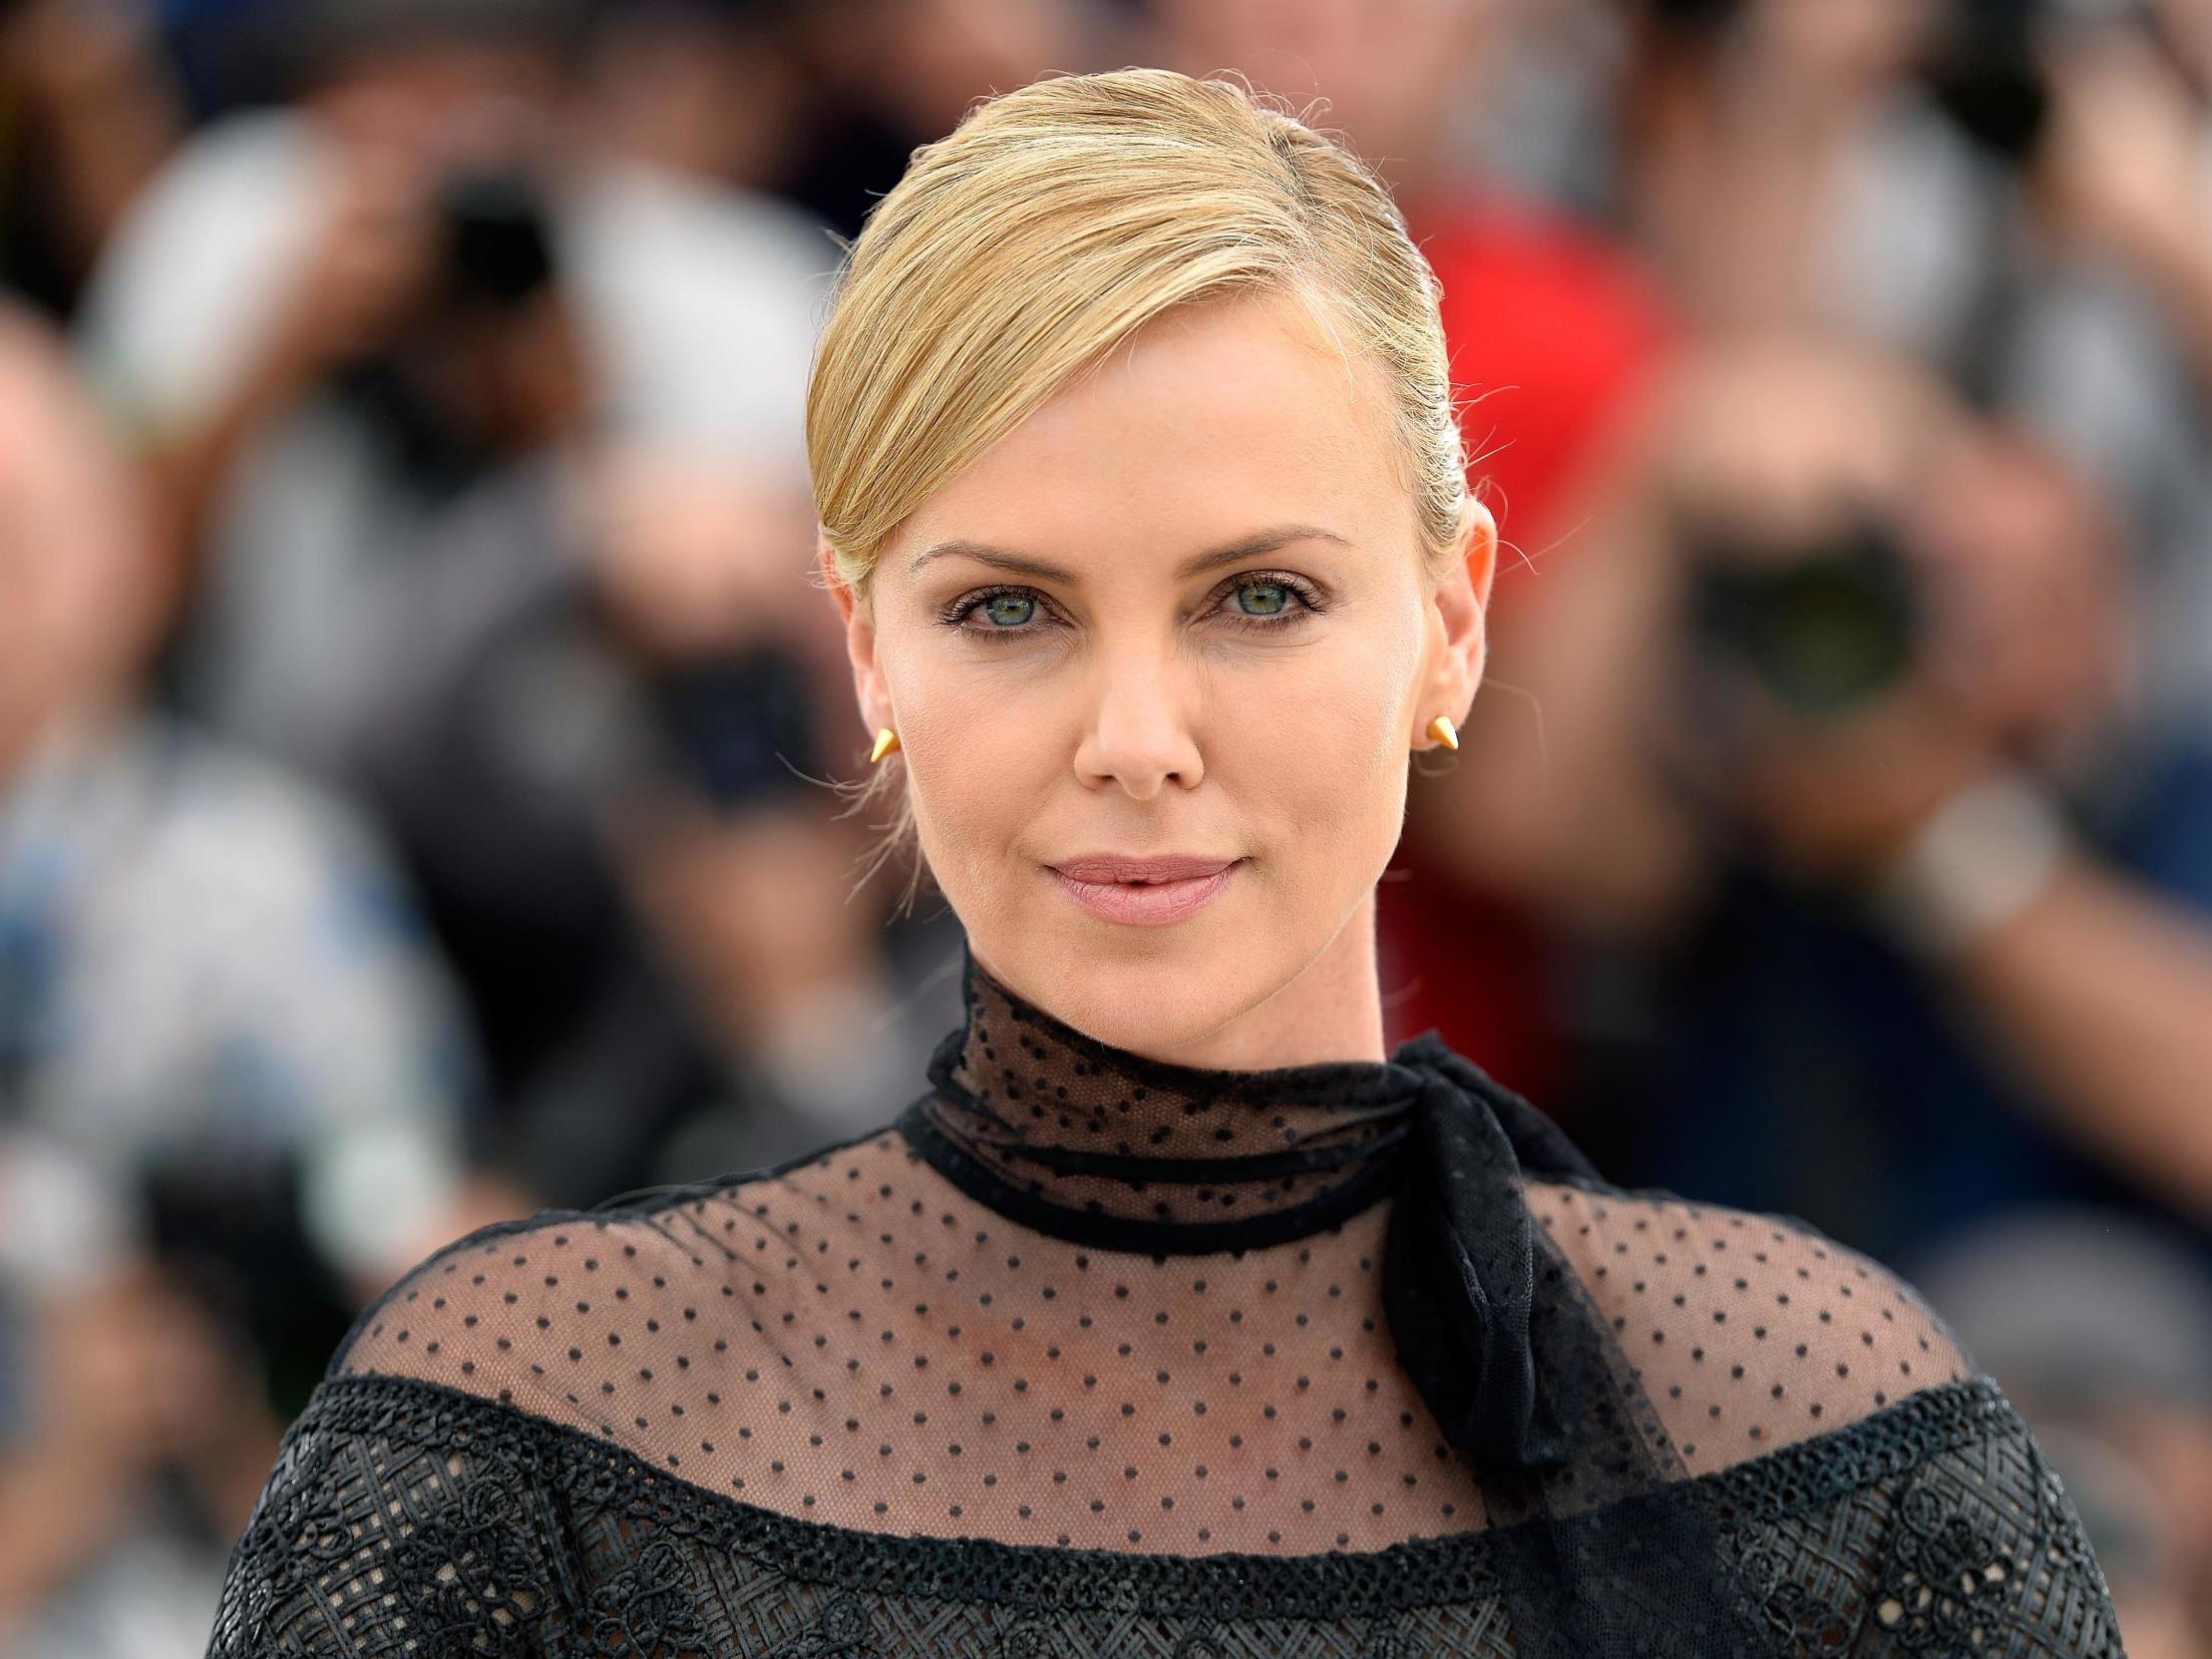 Charlize Theron interview: 'Watching Bombshell has been eye-opening to a lot of men'